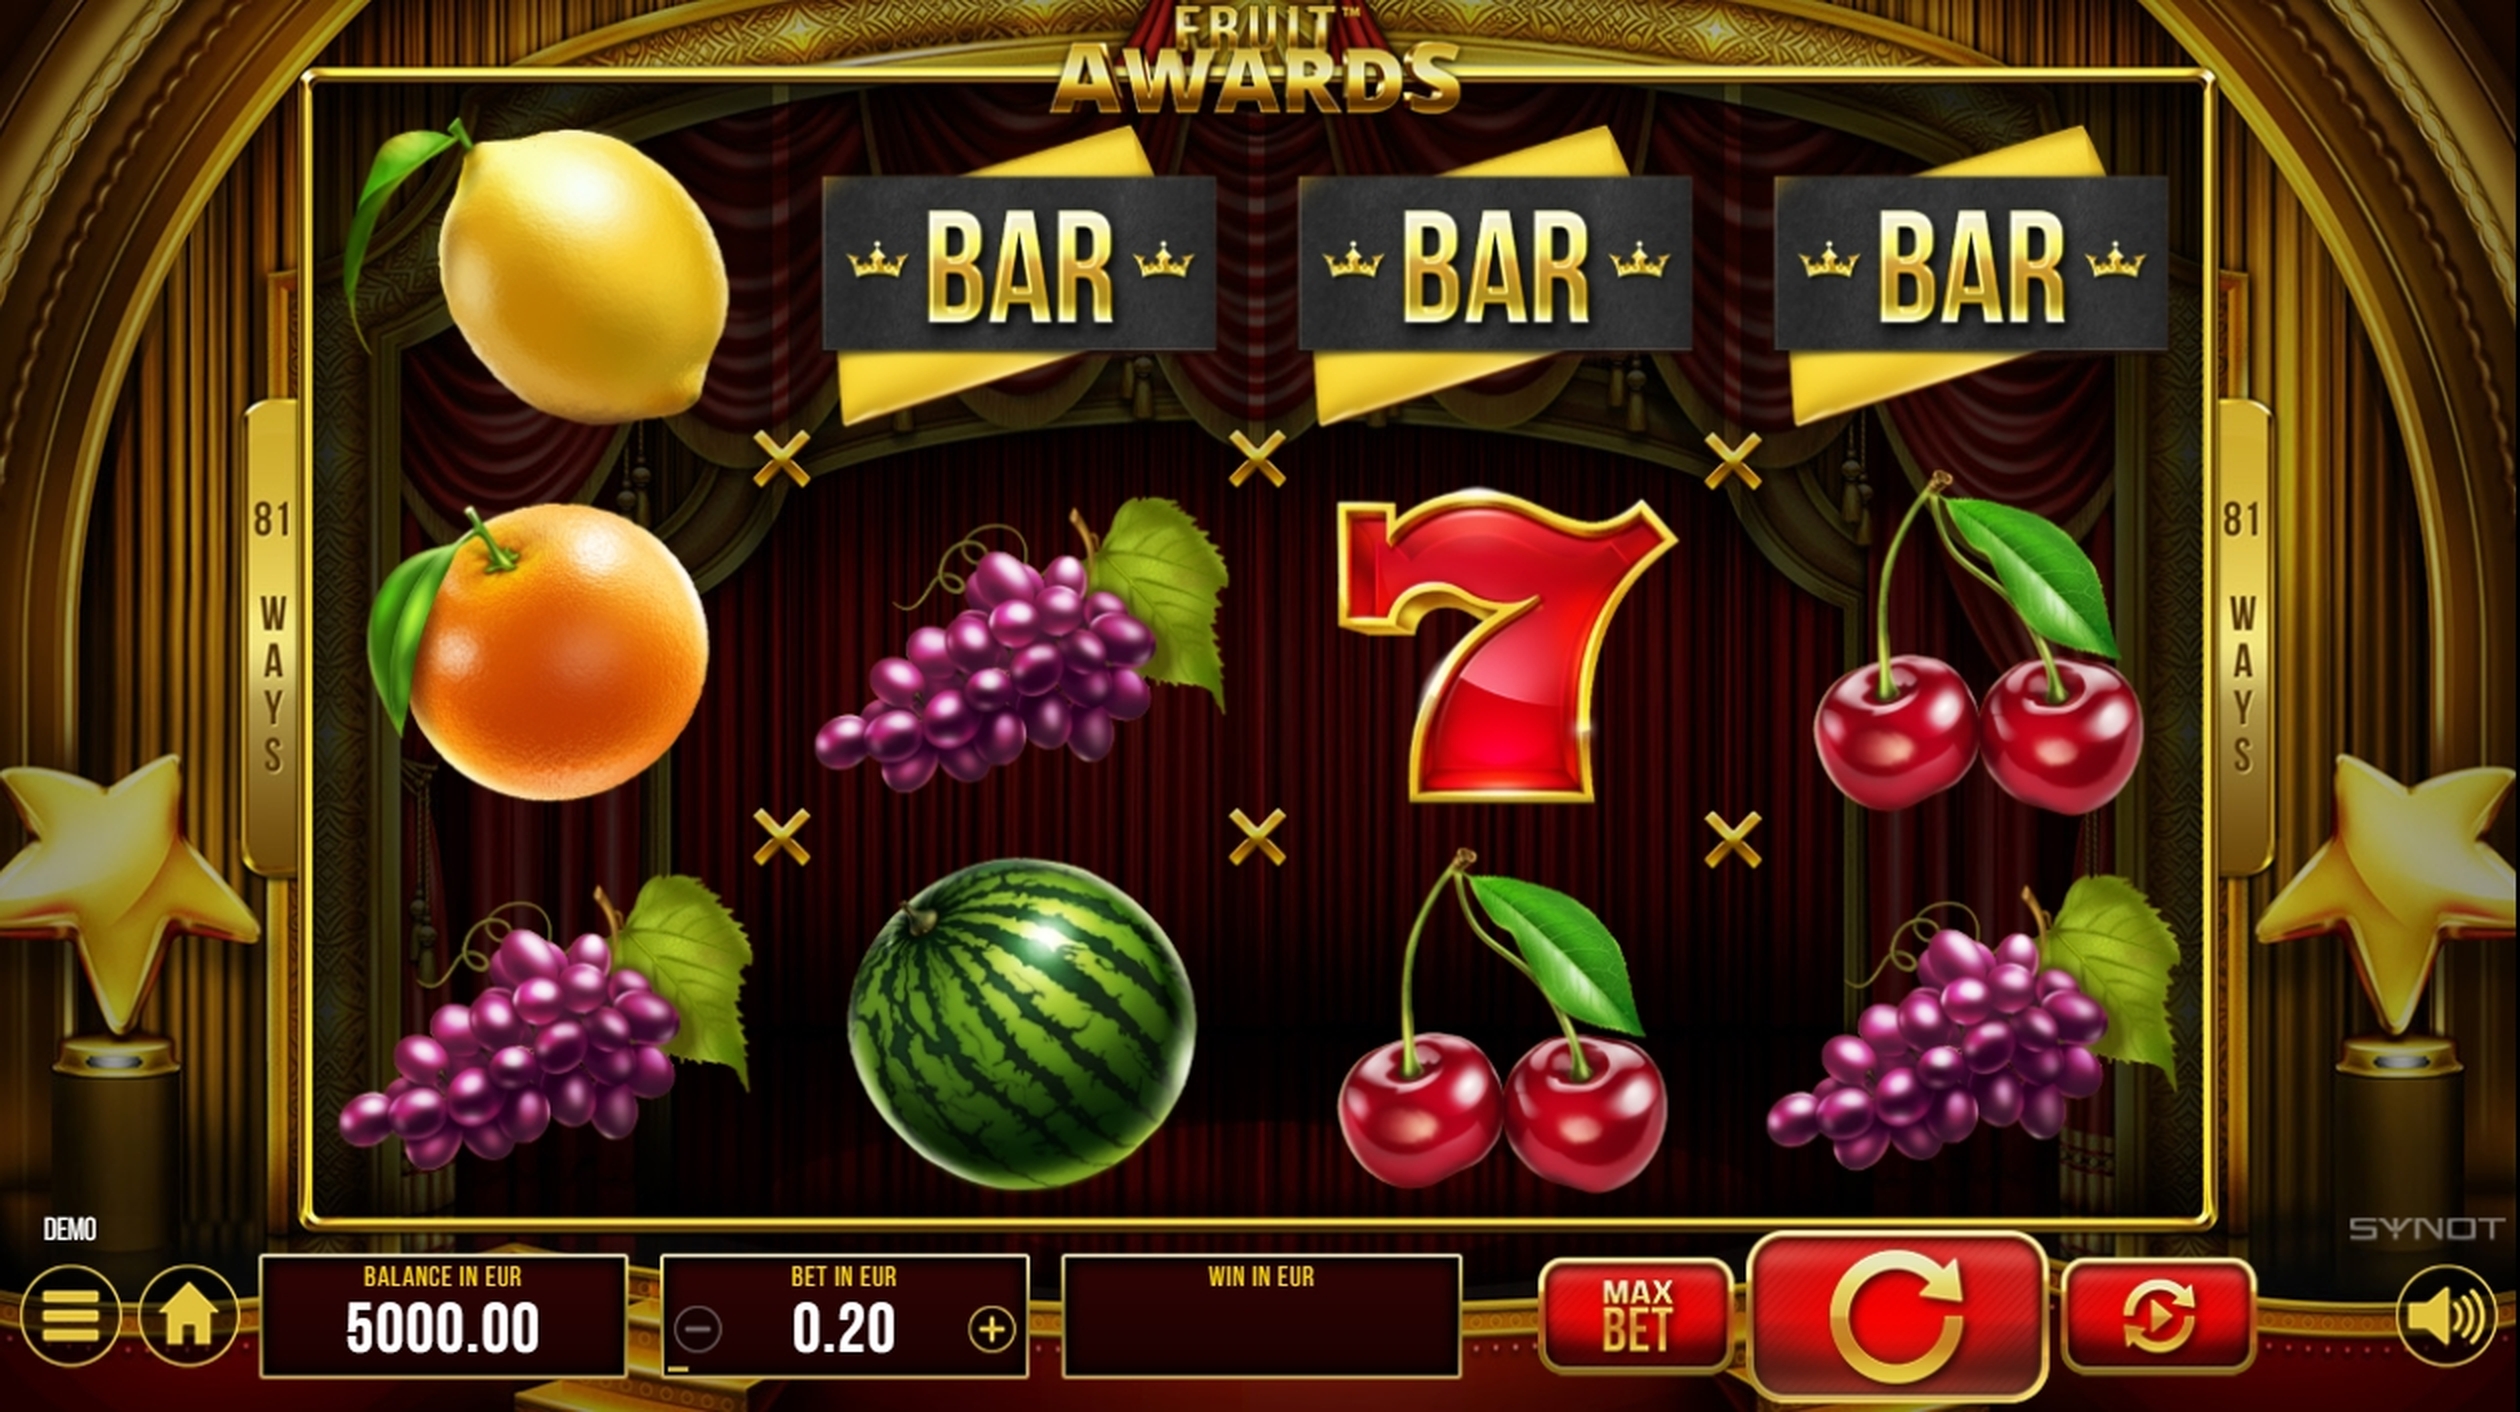 Reels in Fruit Awards Slot Game by Synot Games